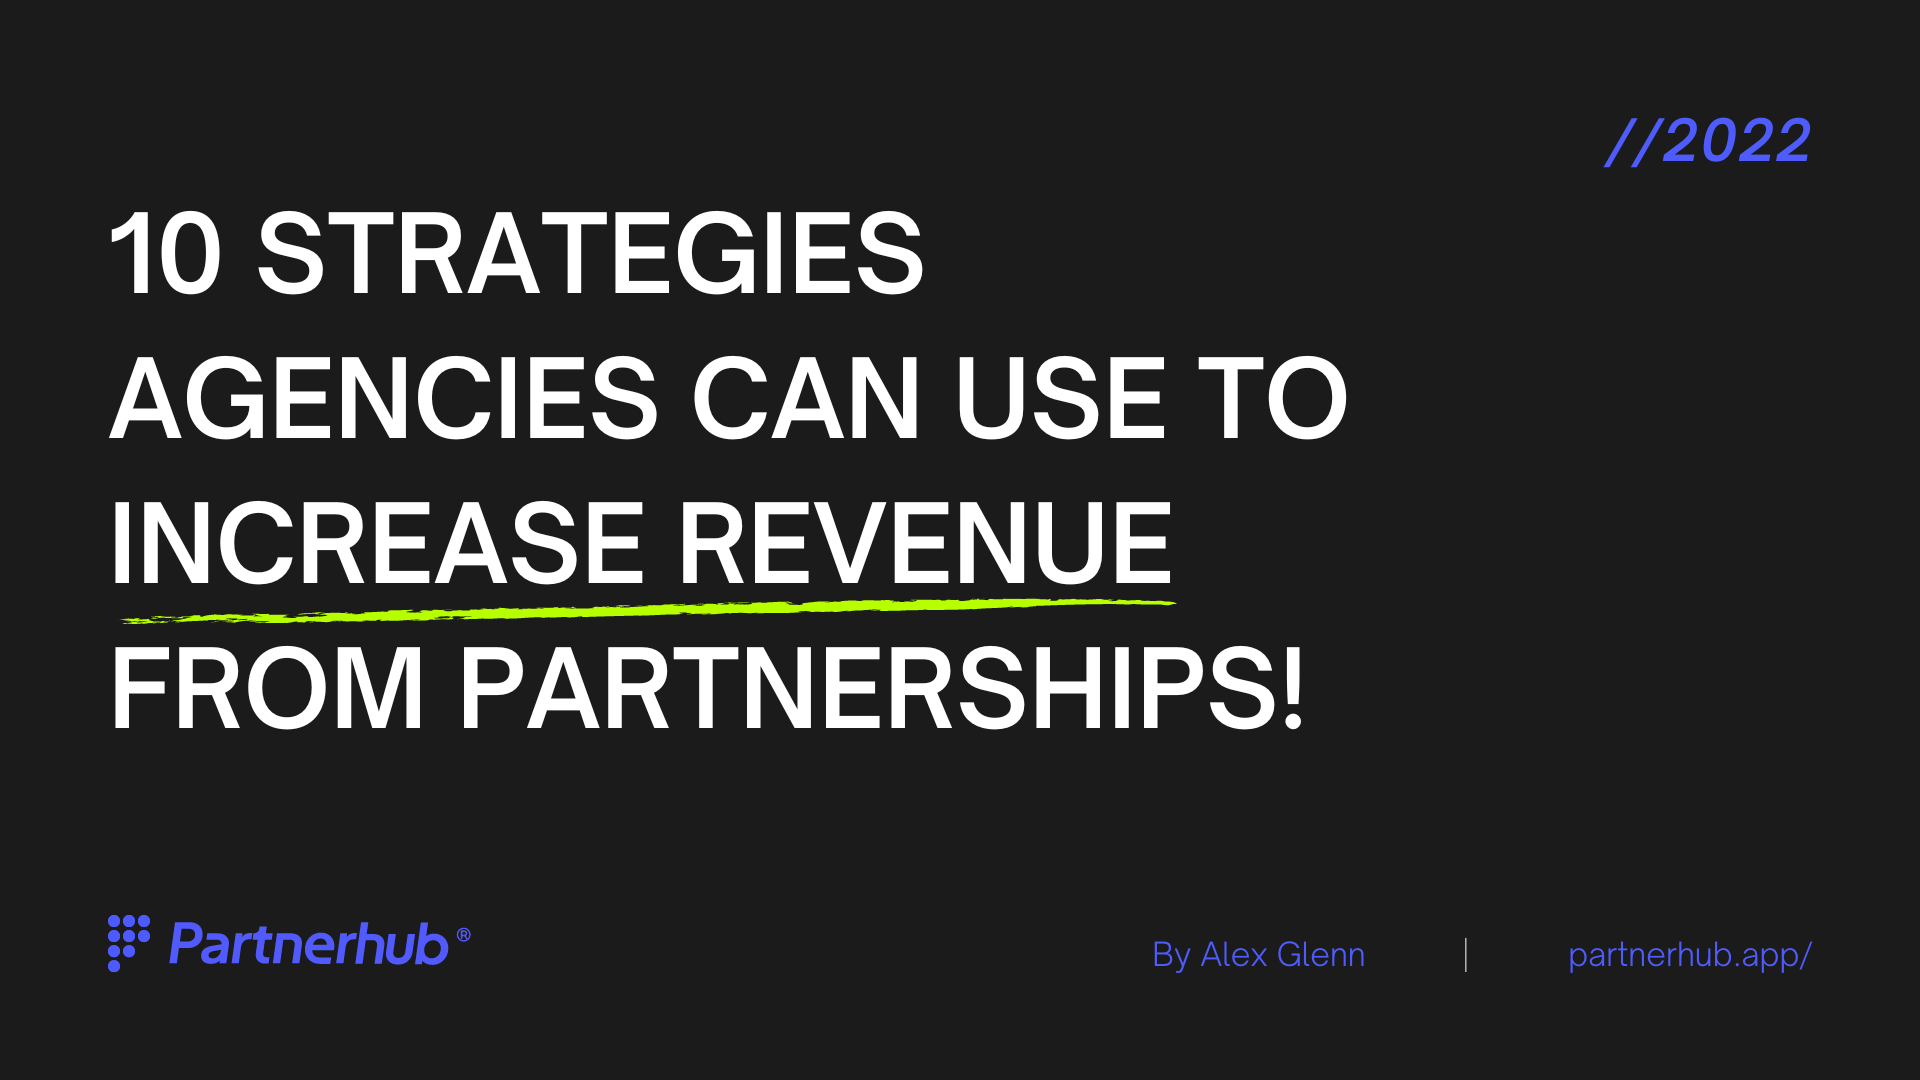 10 Strategies Agencies can use to Increase Revenue from Partnerships 💰